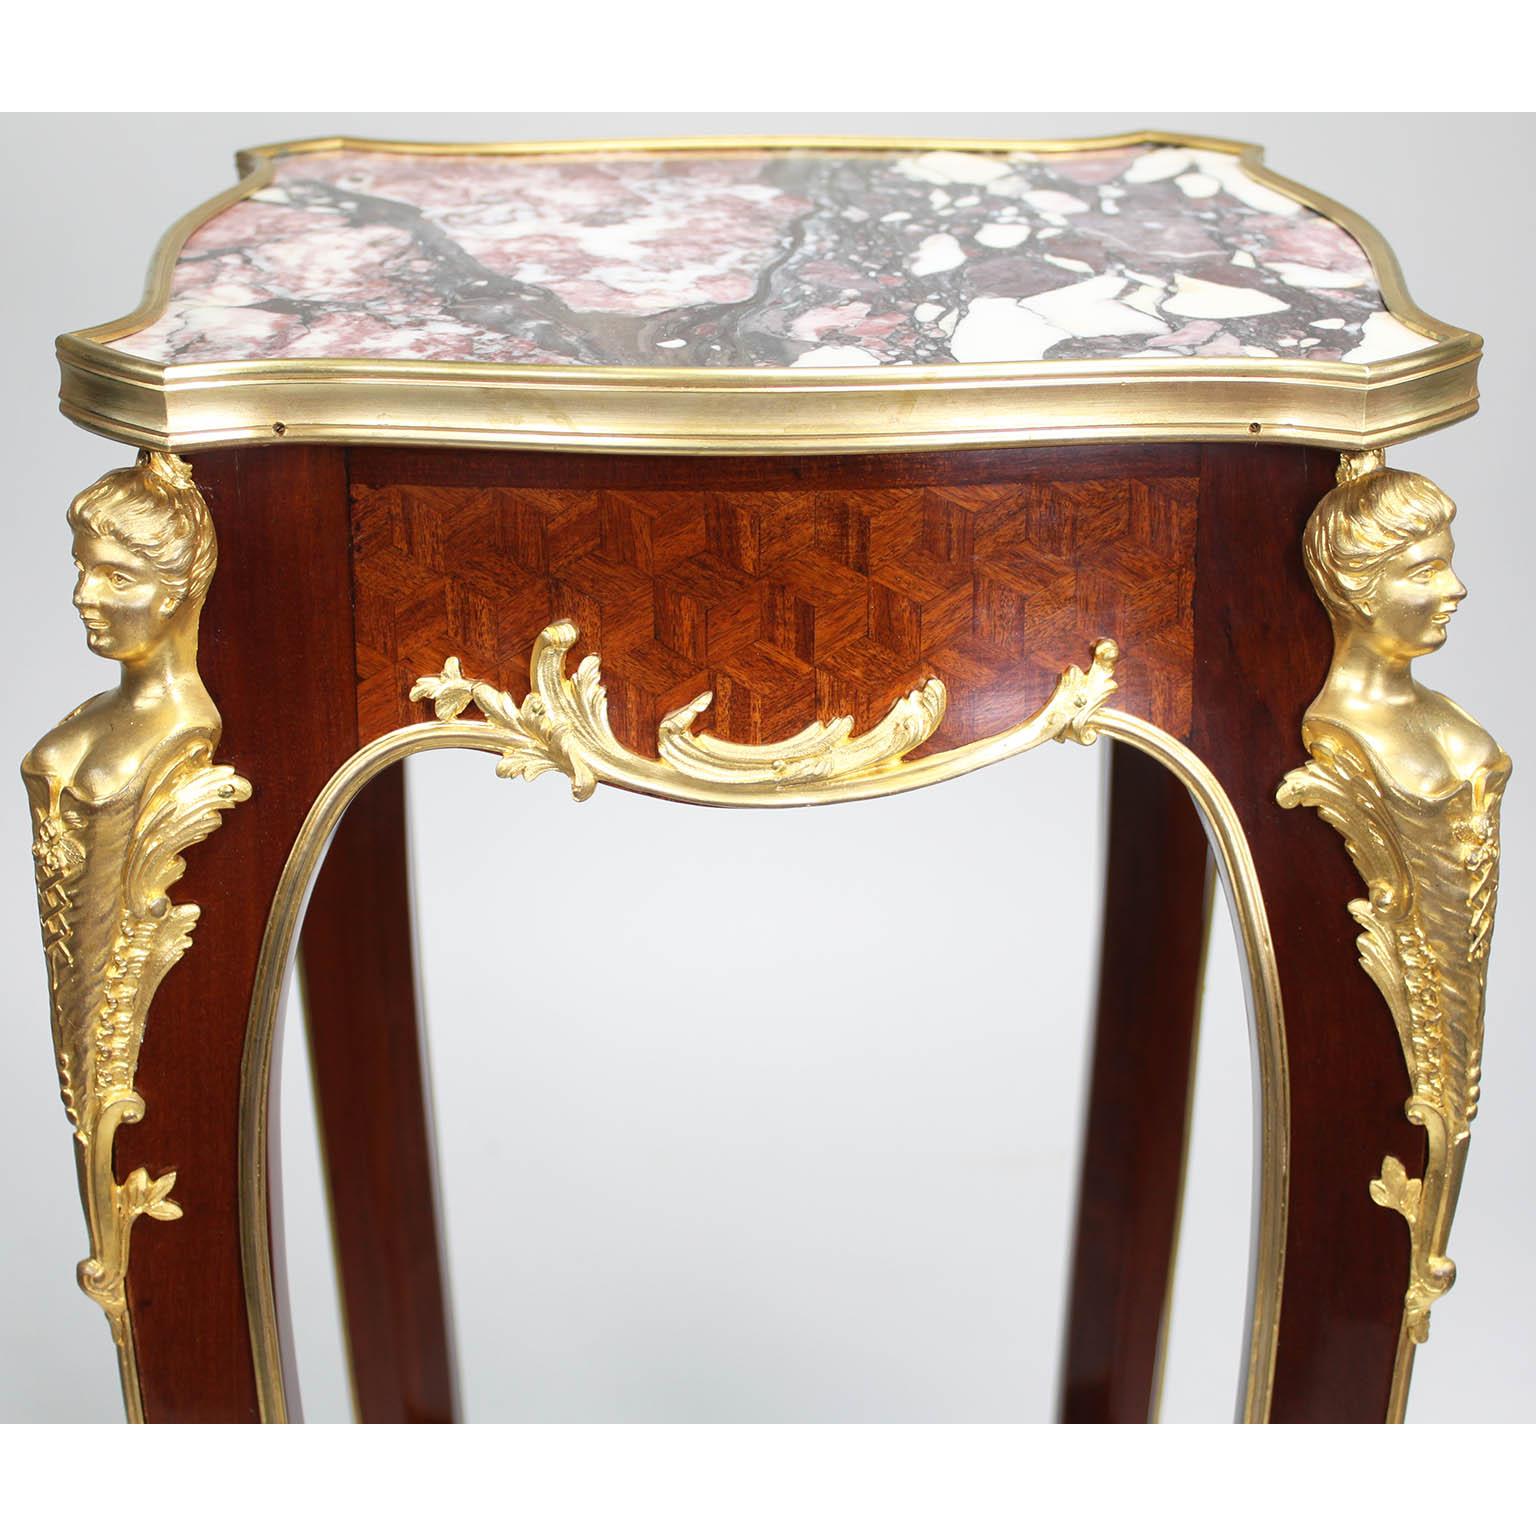 Early 20th Century French Louis XV Style Mahogany & Ormolu Mounted Side Table by Francois Linke For Sale